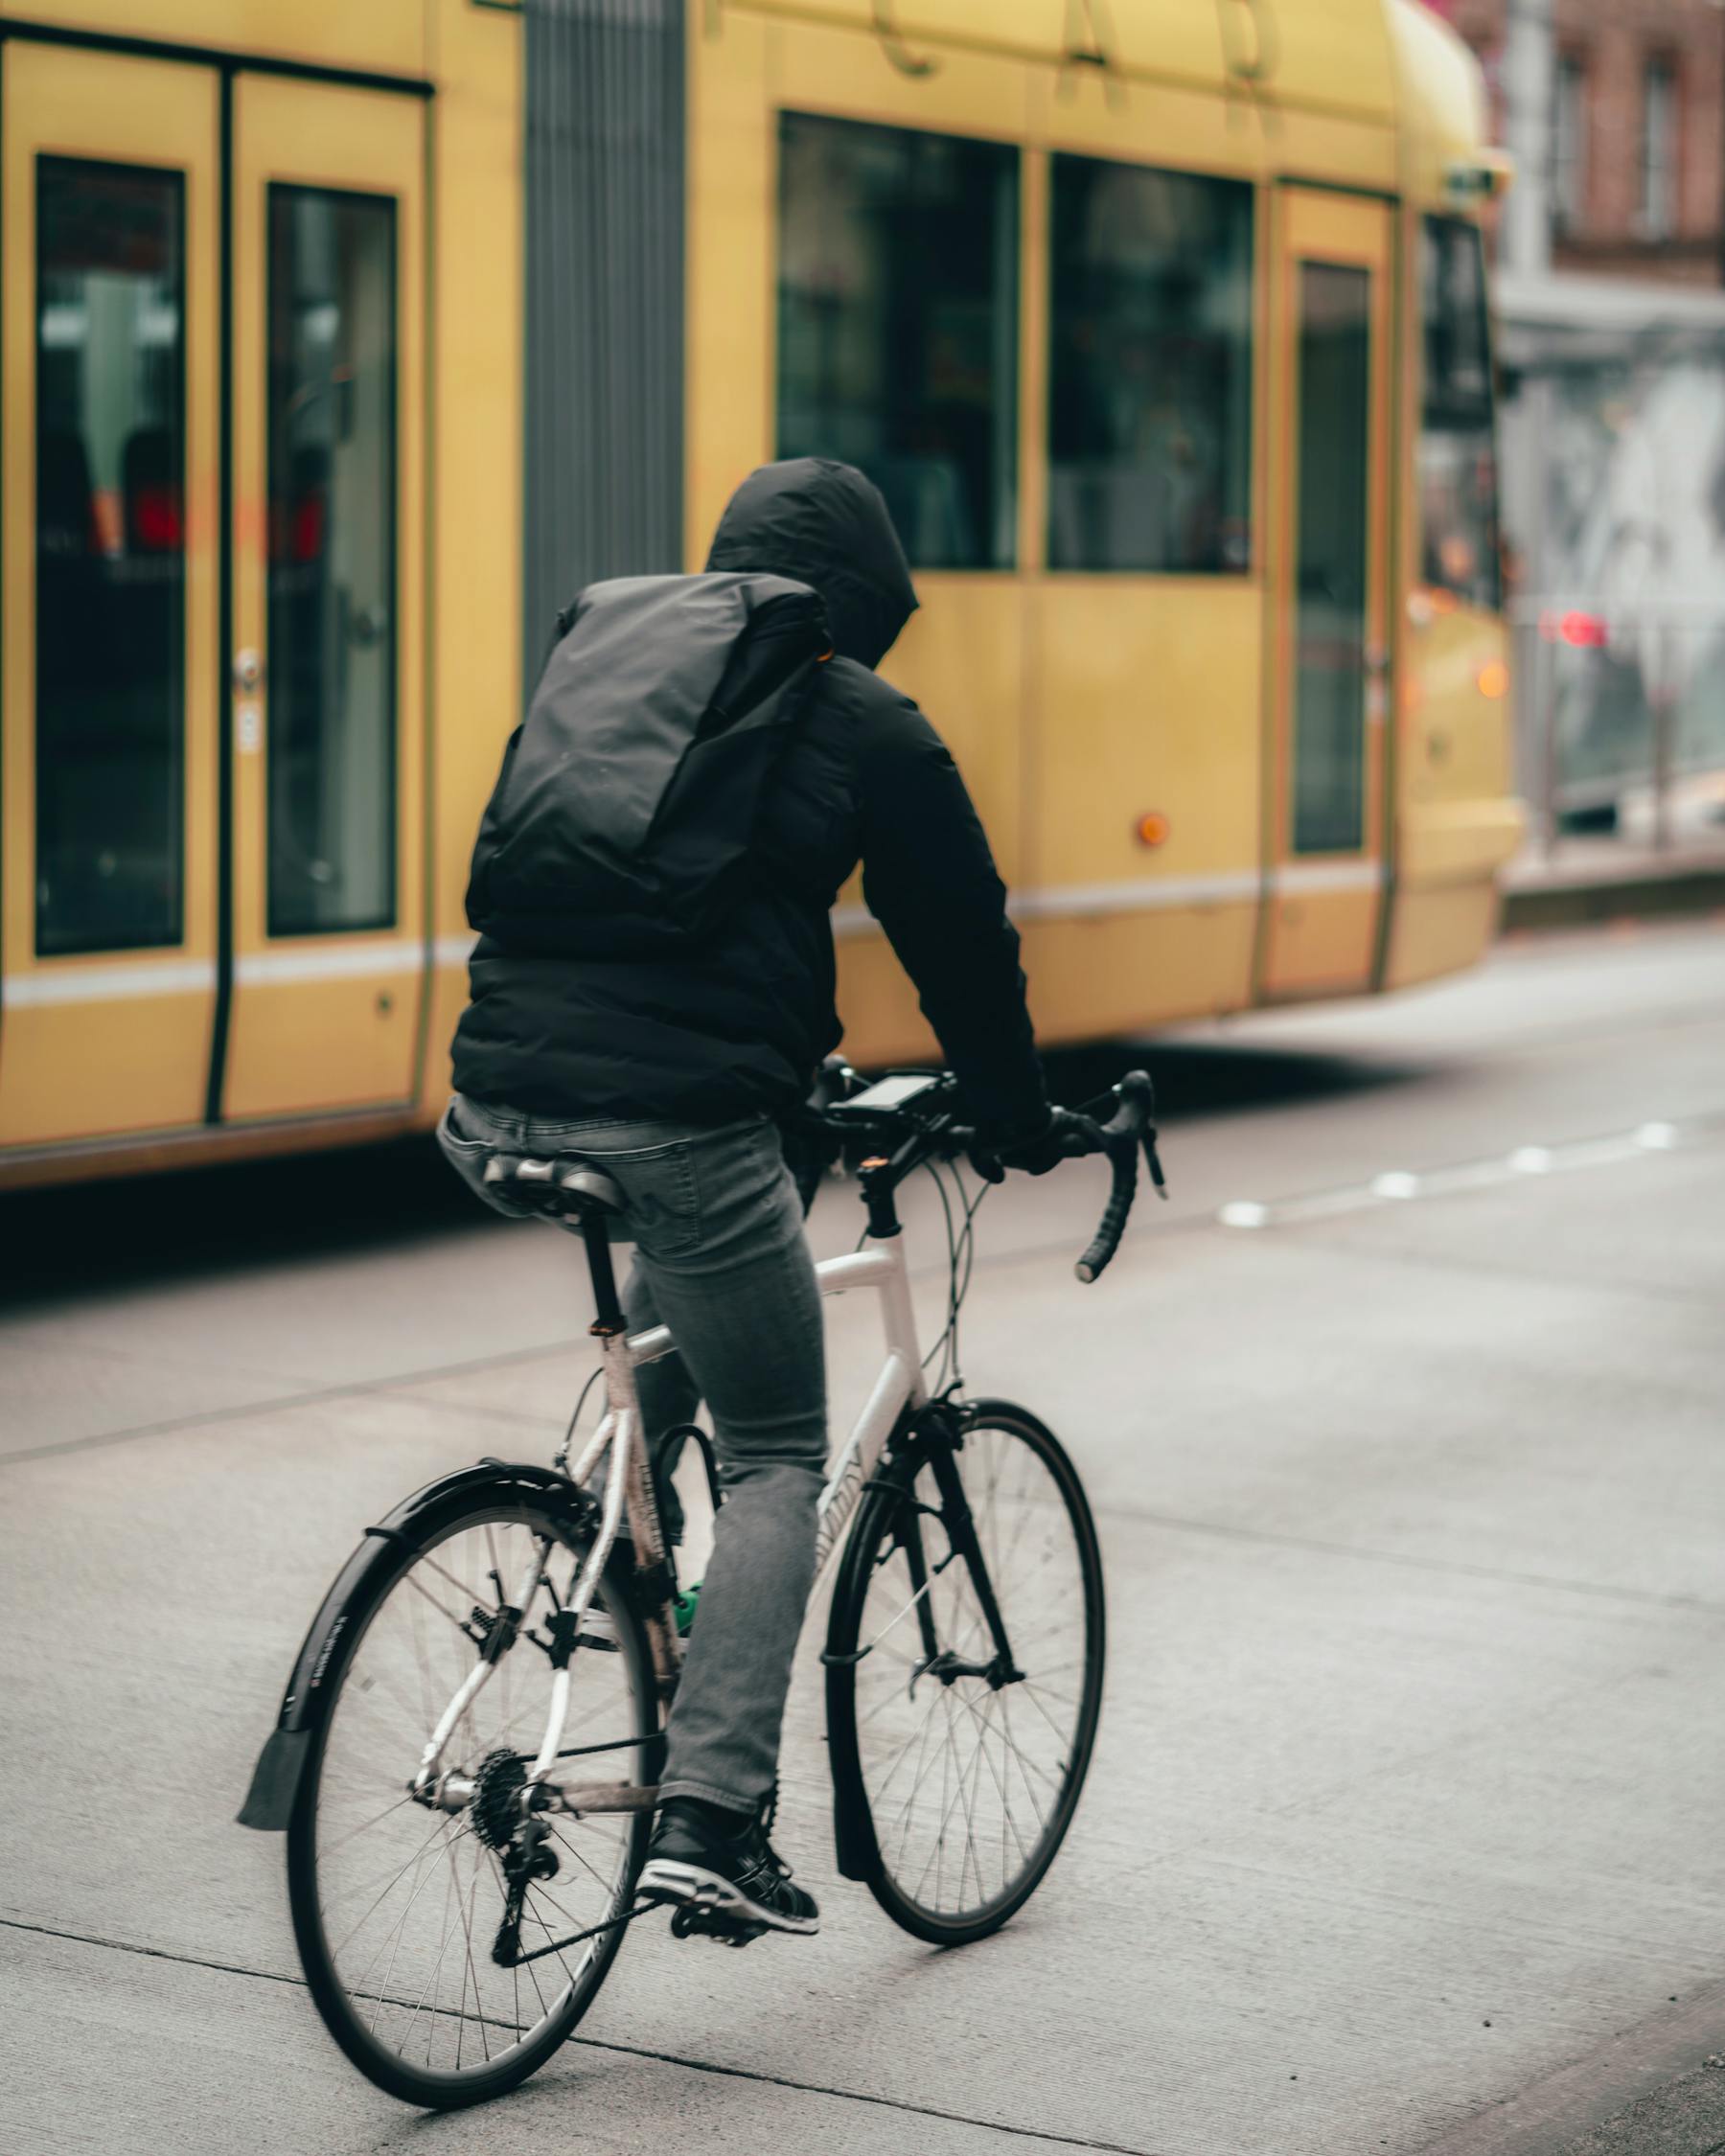 Man In Black Jacket Riding A Bicycle